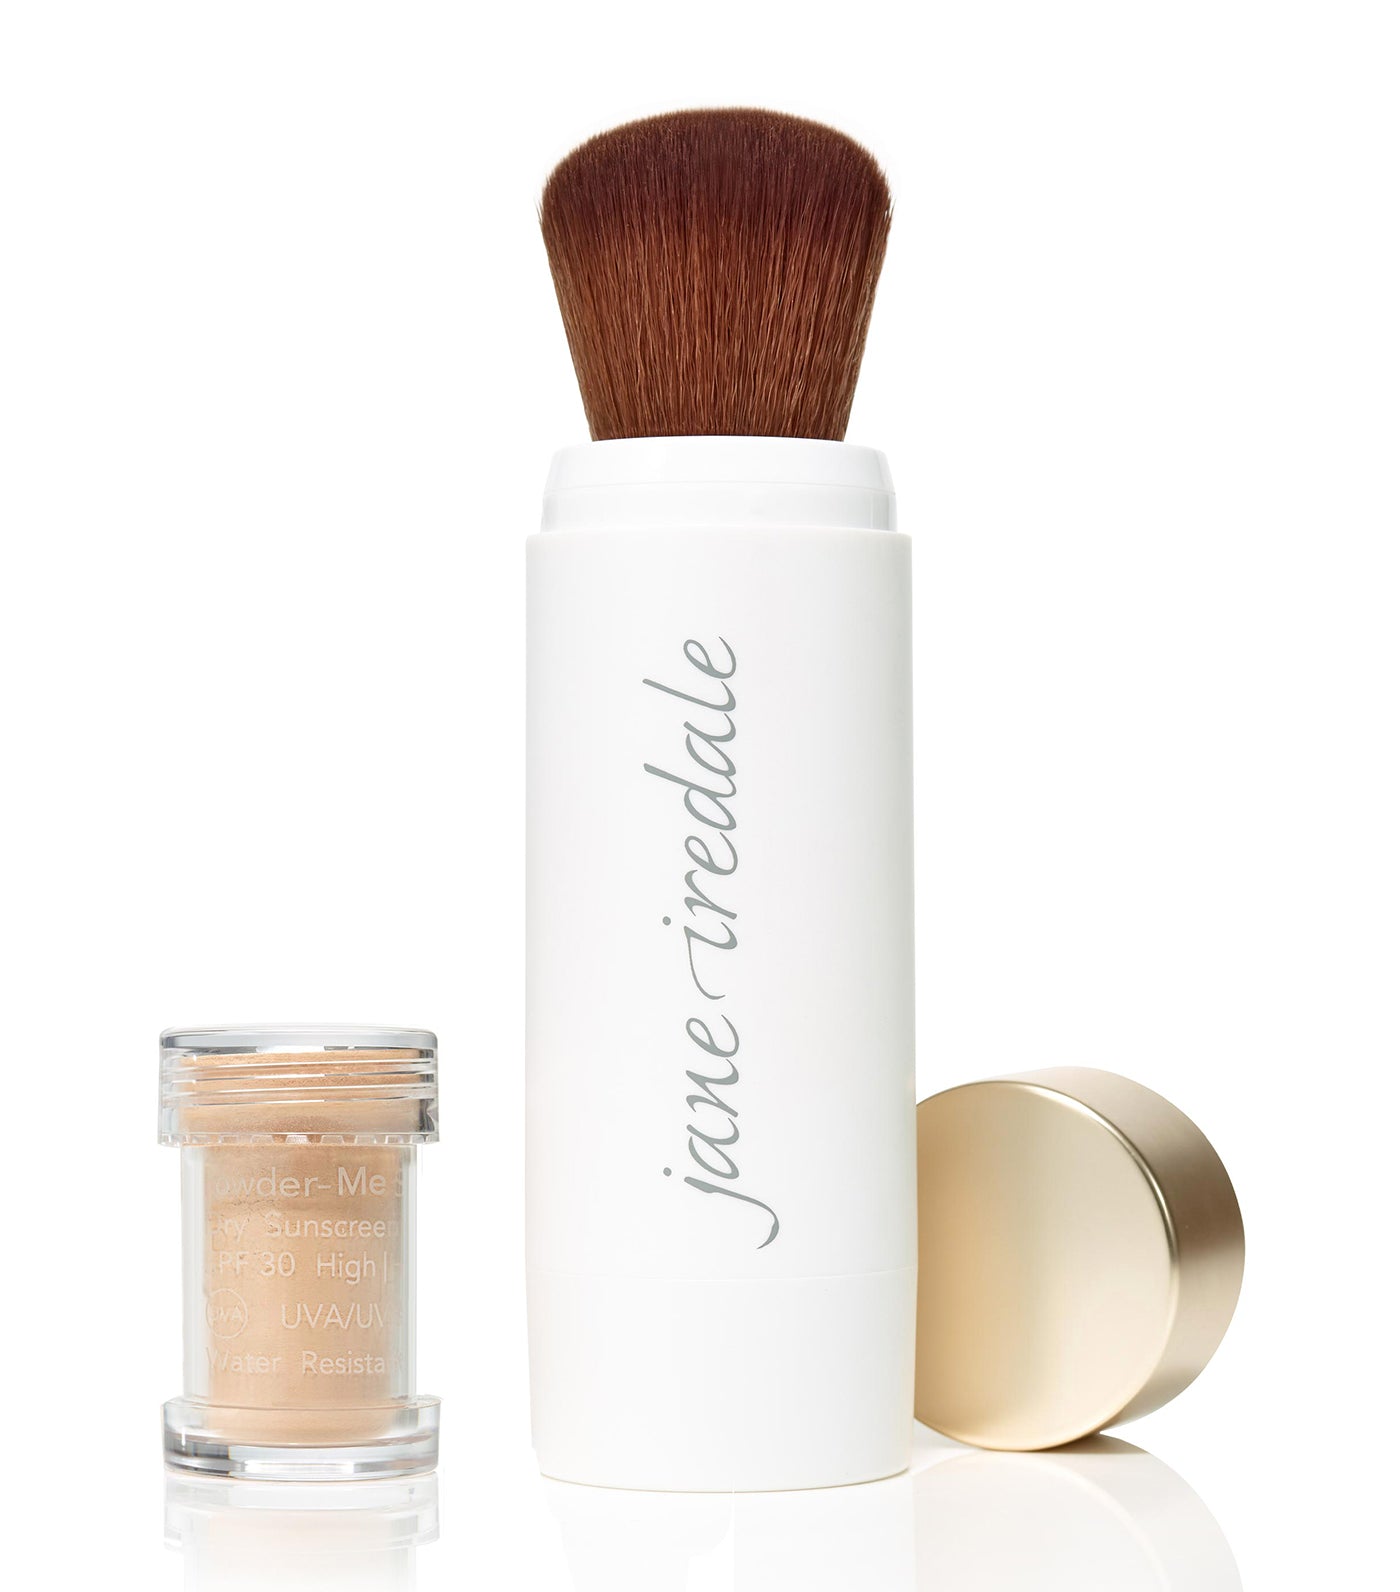 jane iredale Powder-Me SPF® 30 Dry Sunscreen - Refillable nude